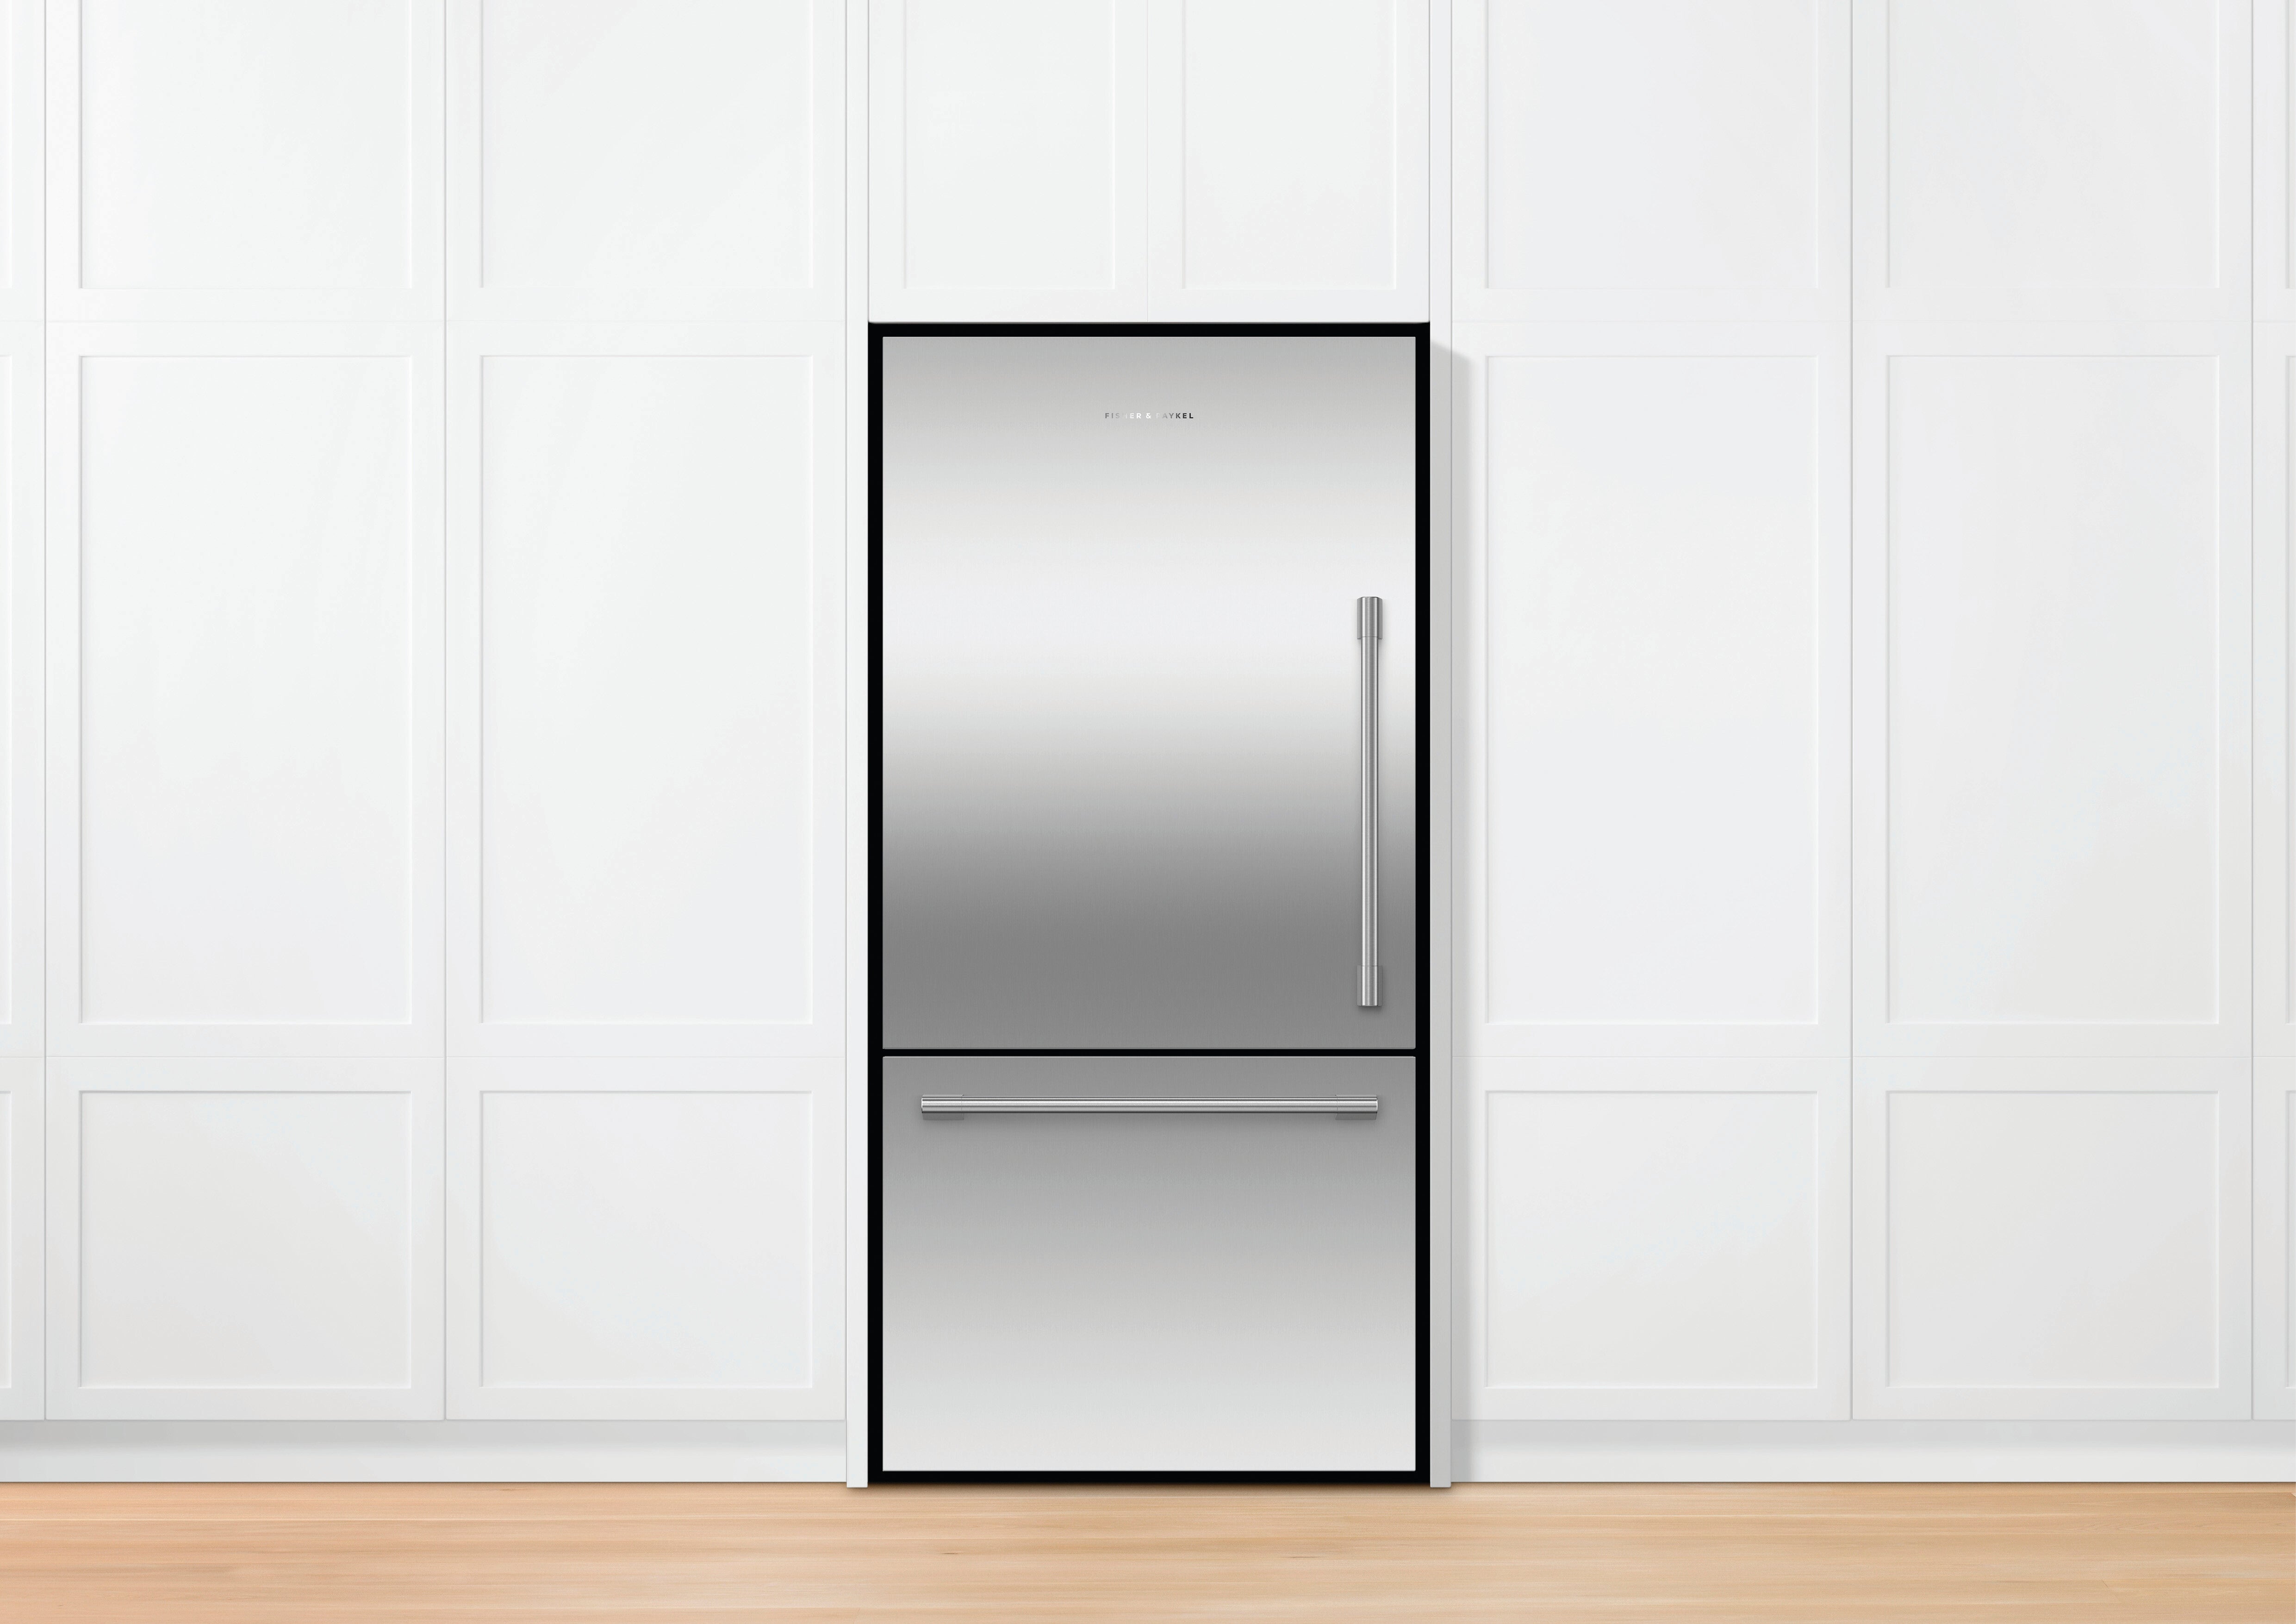 Fisher Paykel - 32 Inch 17.1 cu. ft Bottom Mount Refrigerator in Stainless - RF170WLHJX1